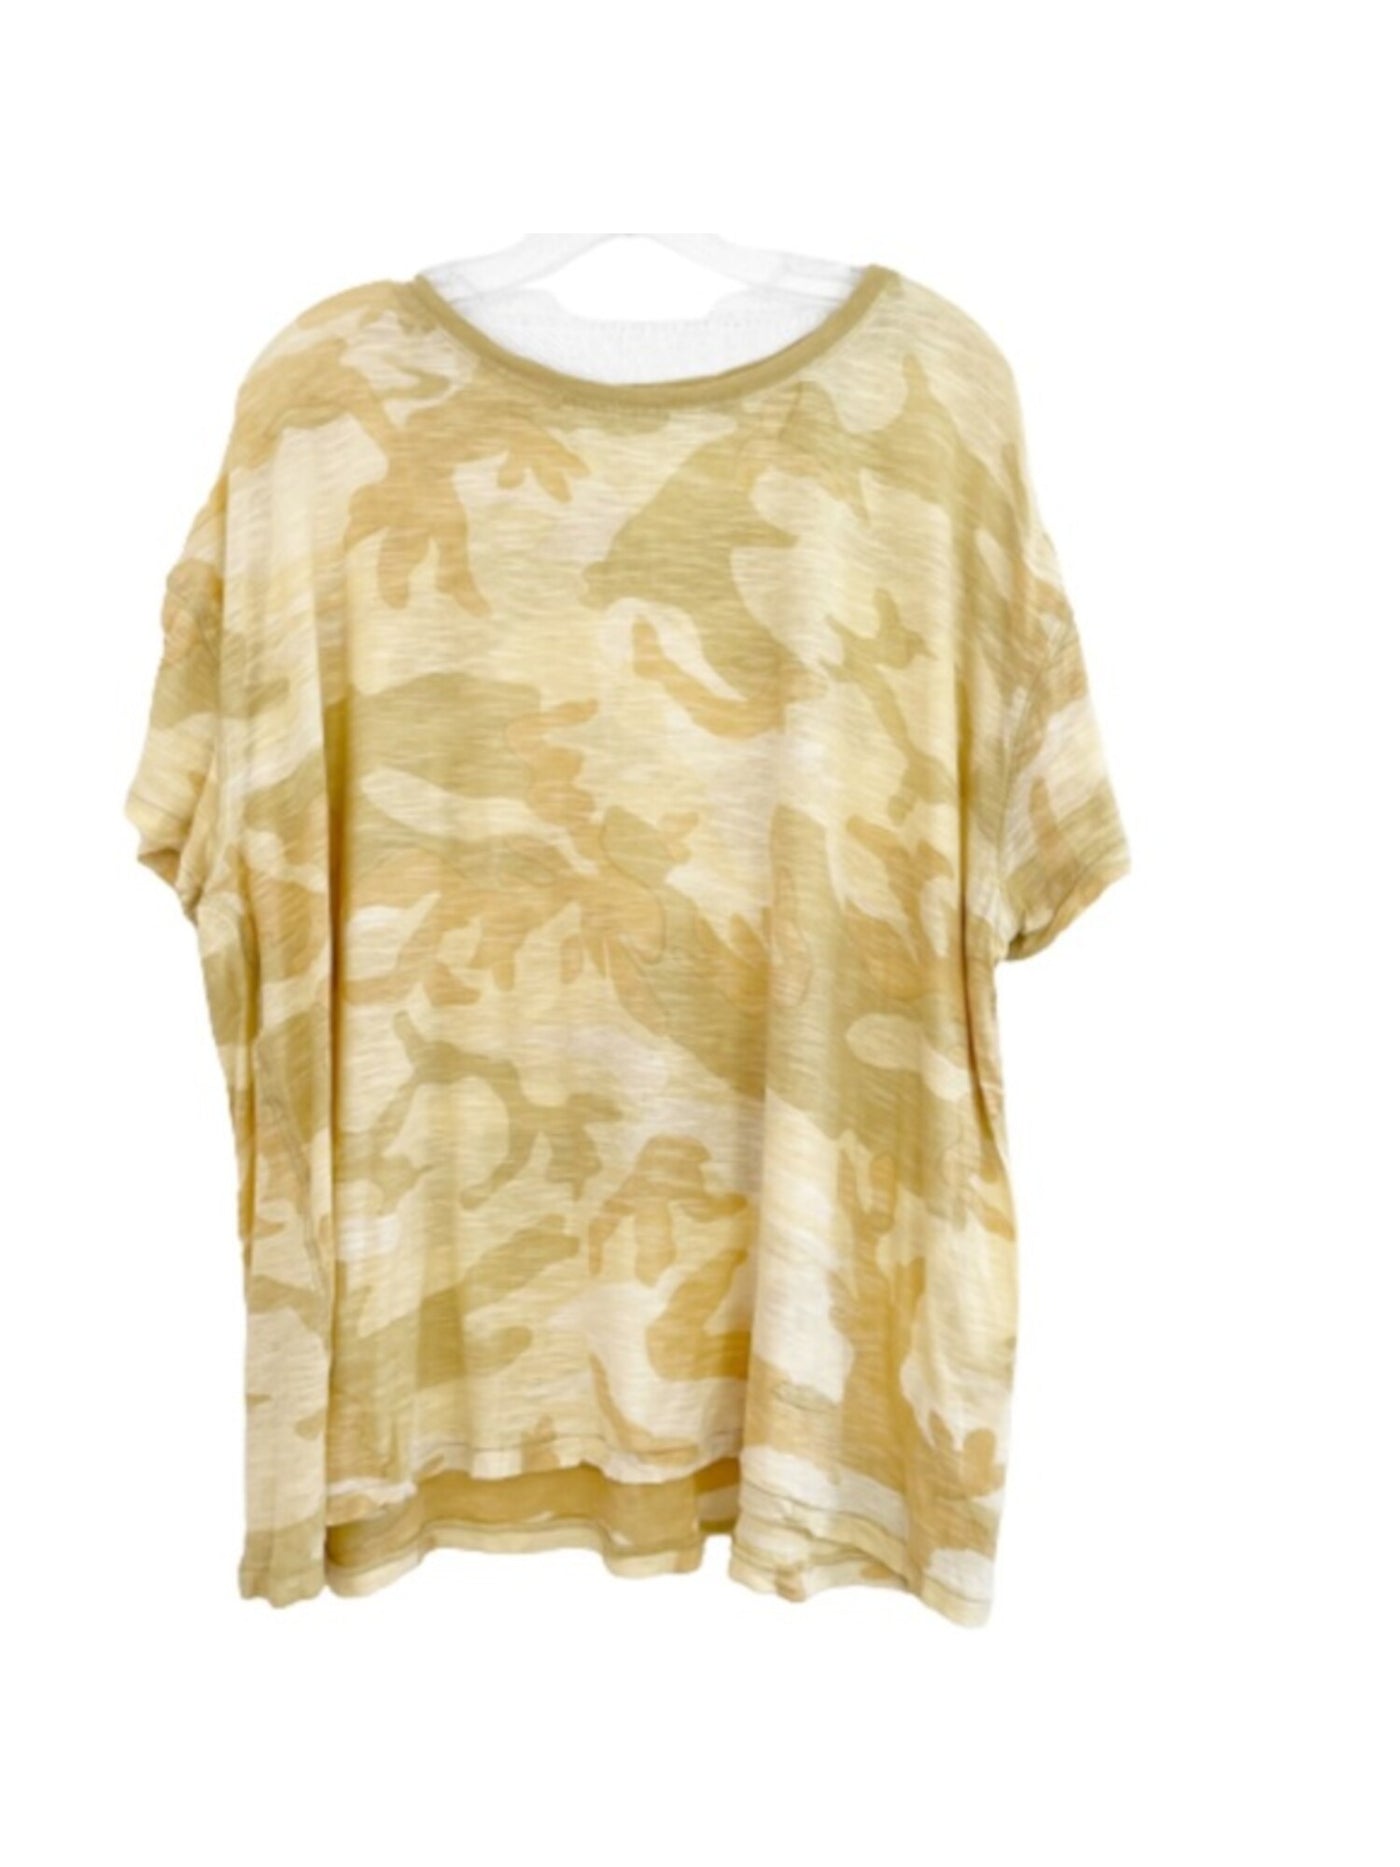 WE THE FREE Womens Gold Printed Short Sleeve Scoop Neck Top Size: XL